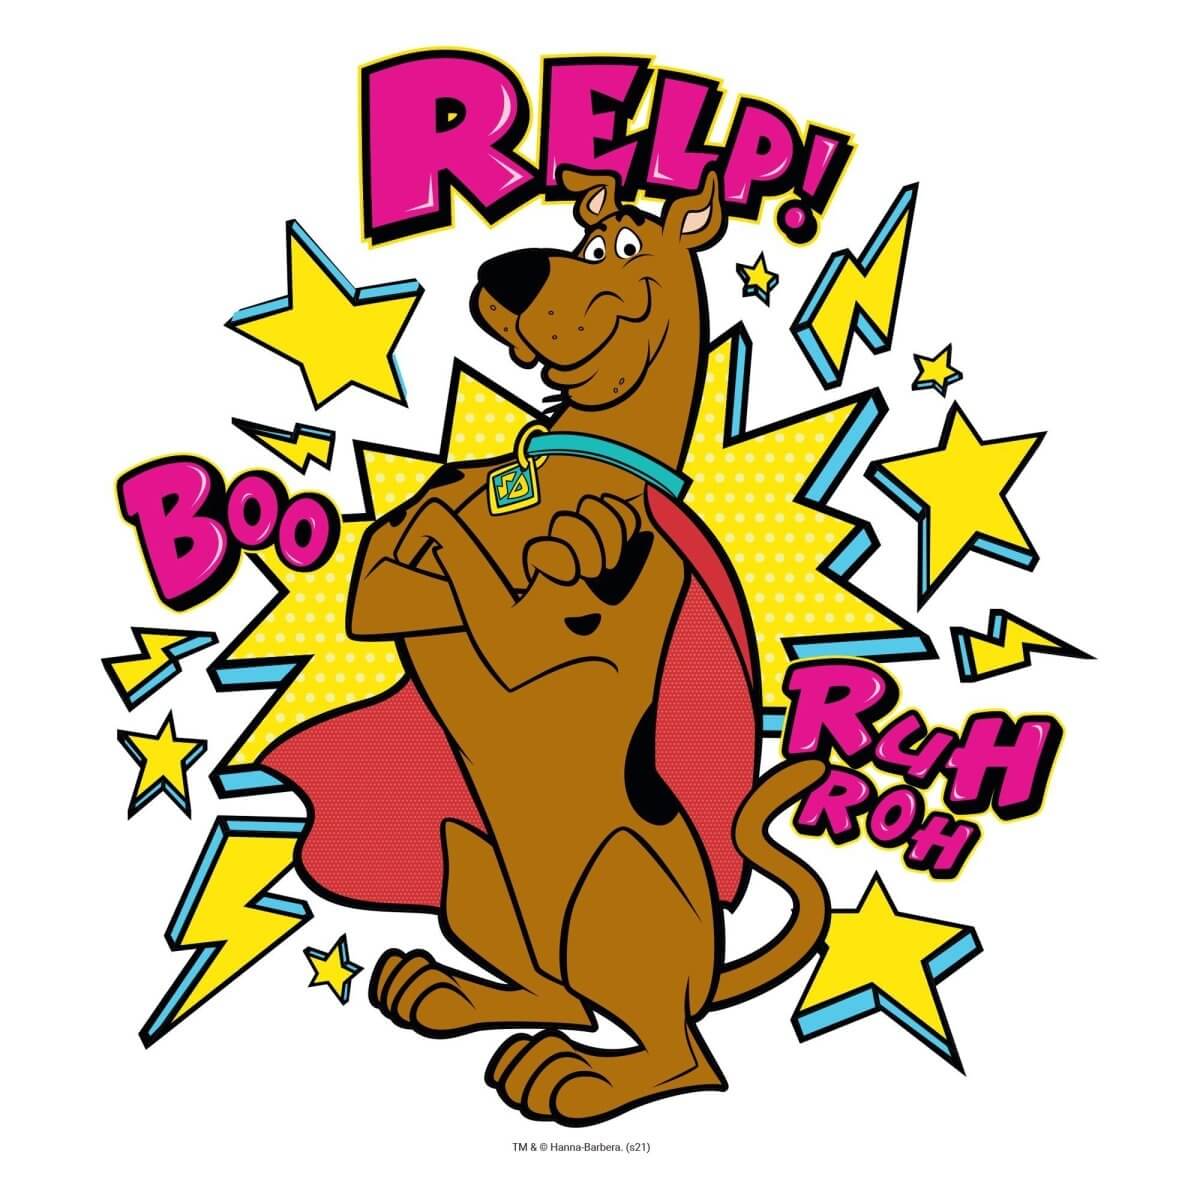 Kismet Decals Home & Room Decor Scooby-Doo to the Rescue Wall decal sticker - officially licensed - latex printed with no solvent odor - Kismet Decals